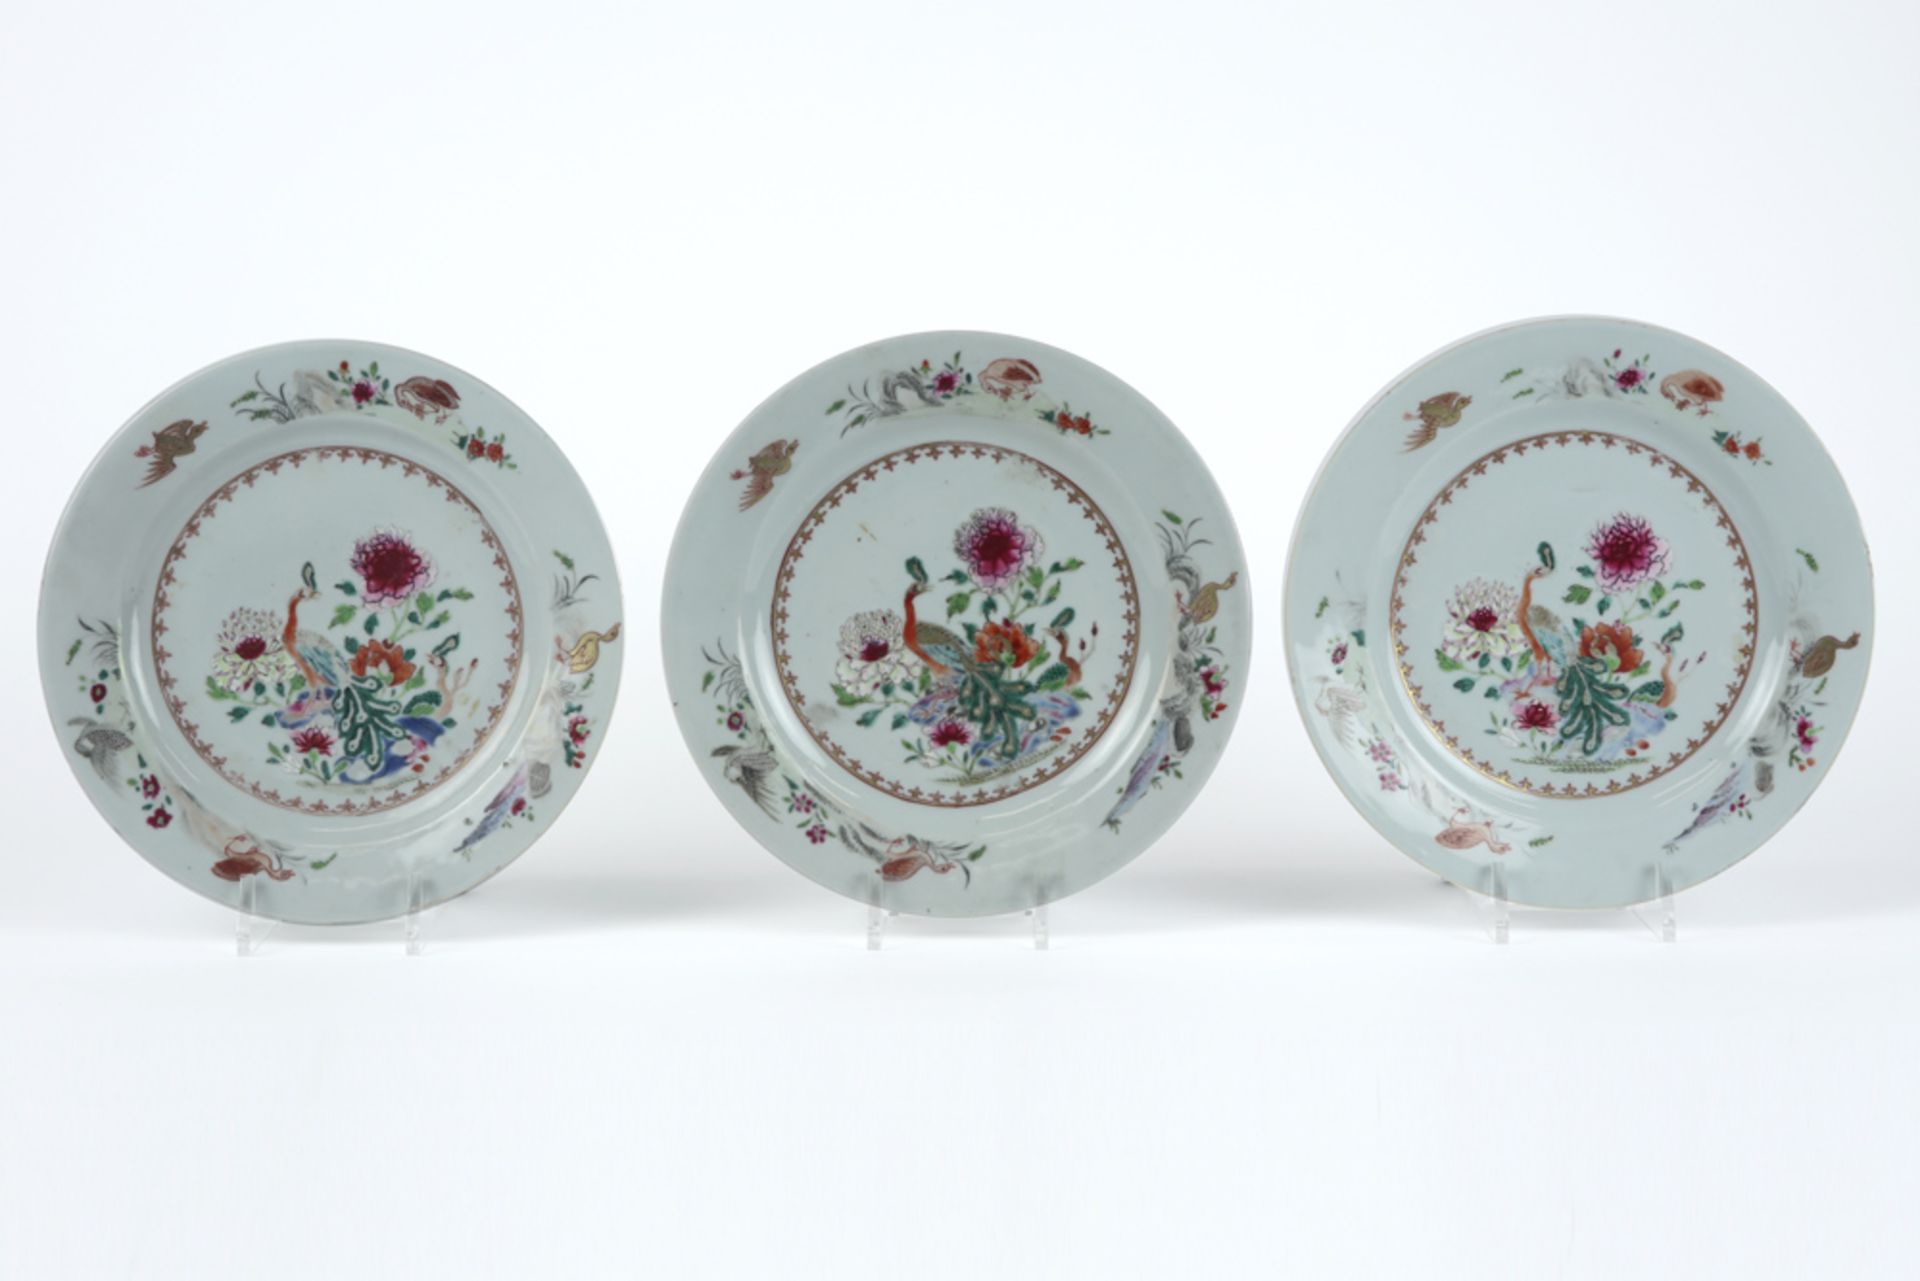 series of six 18th Cent. Chinese plate in porcelain with a 'Famille Rose' decor with flowers and - Image 4 of 5